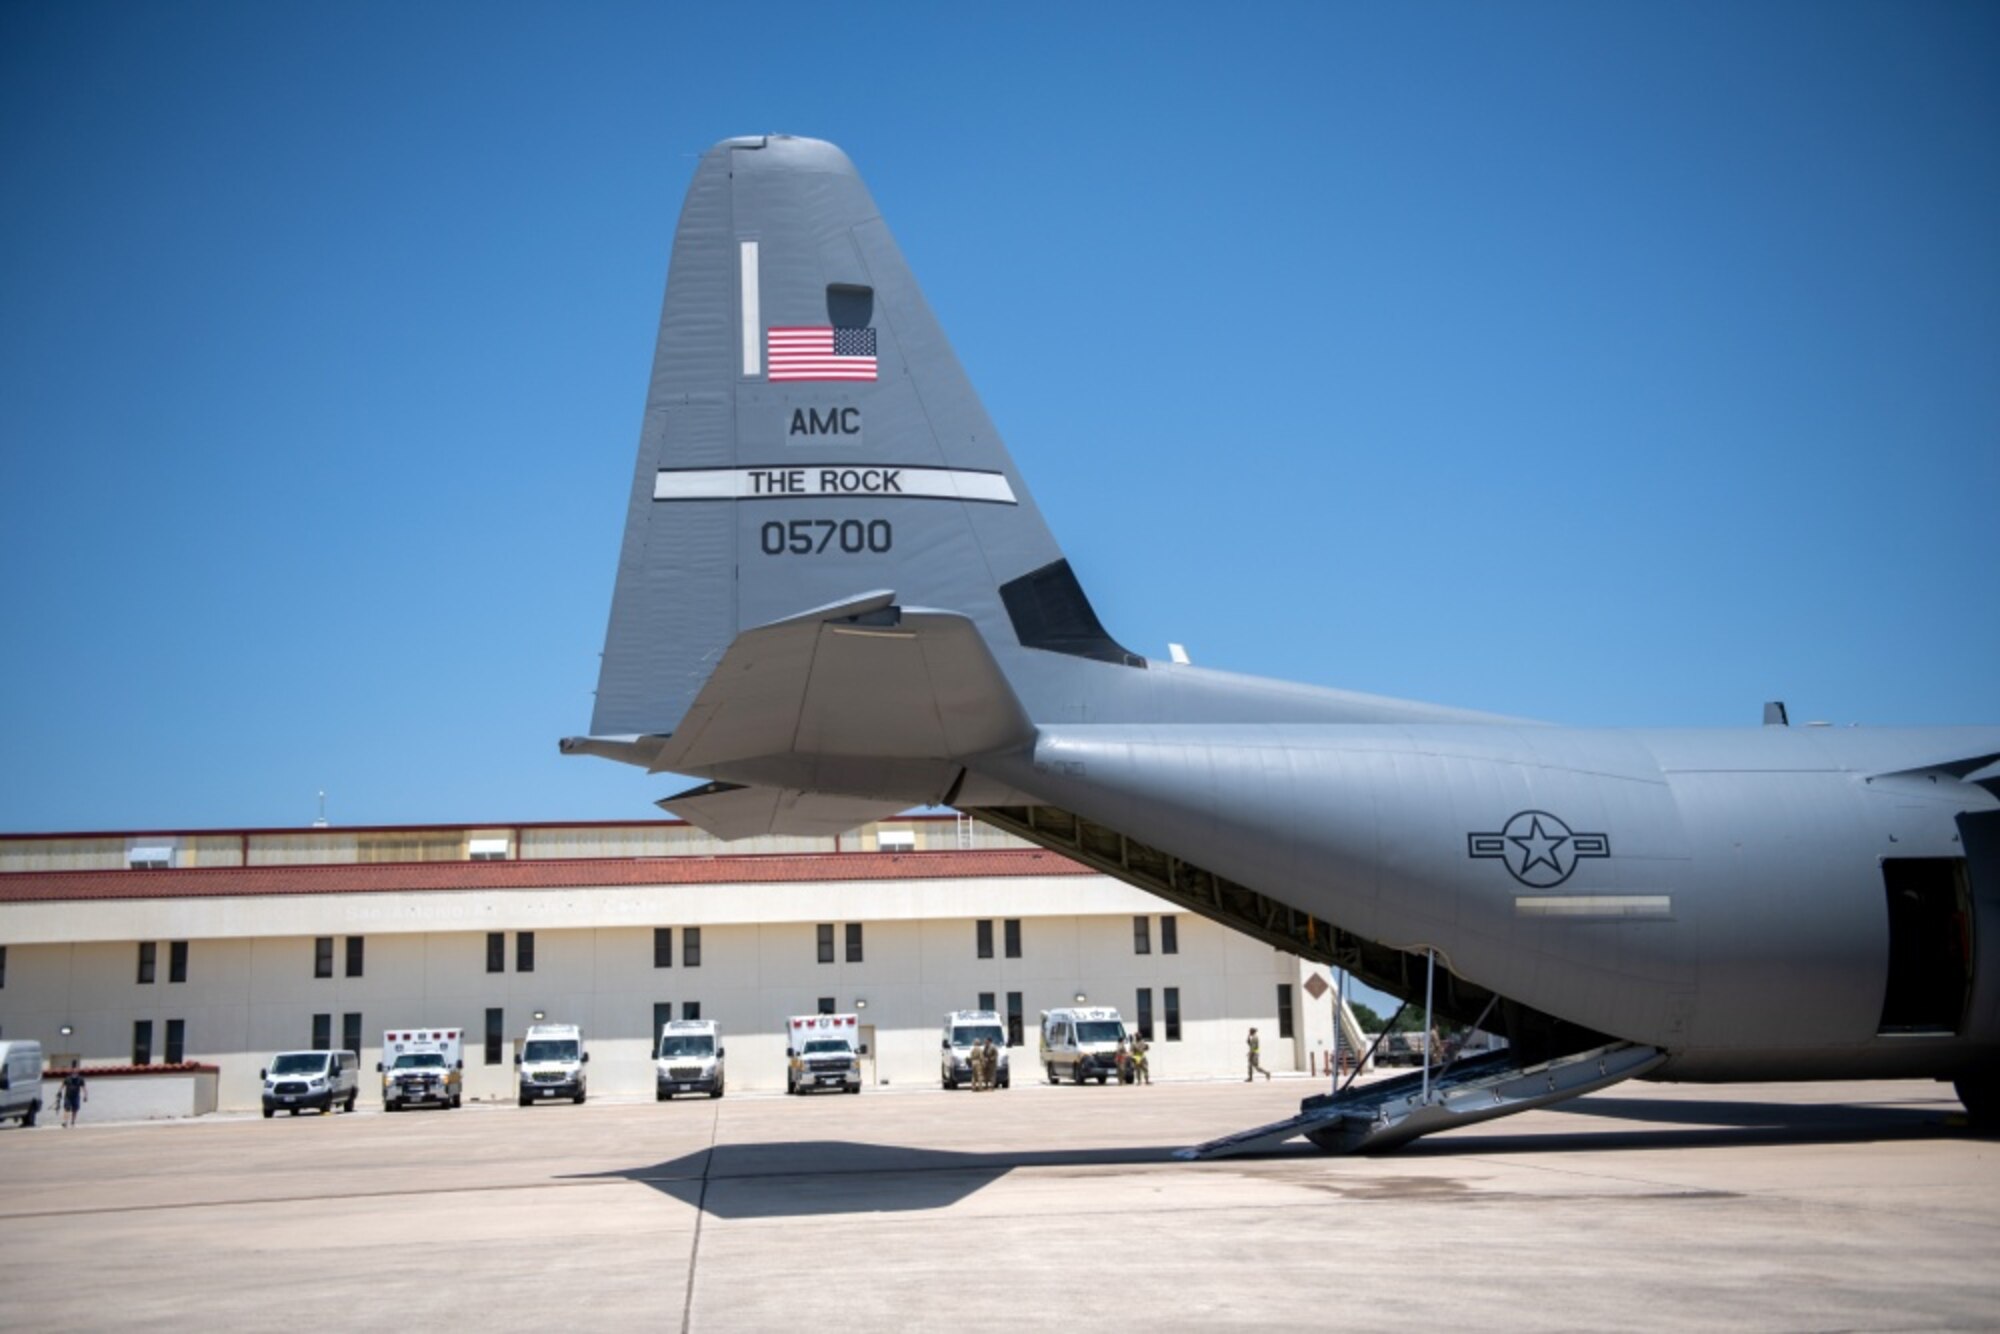 Ambulances transporting eight spinal cord injury patients from Audie Murphy Veterans Affairs Medical Center, South Texas Veterans Health Care System, San Antonio, Texas, arrive at Joint Base San Antonio-Kelly Airfield, Texas, on Tuesday, July 14, 2020.